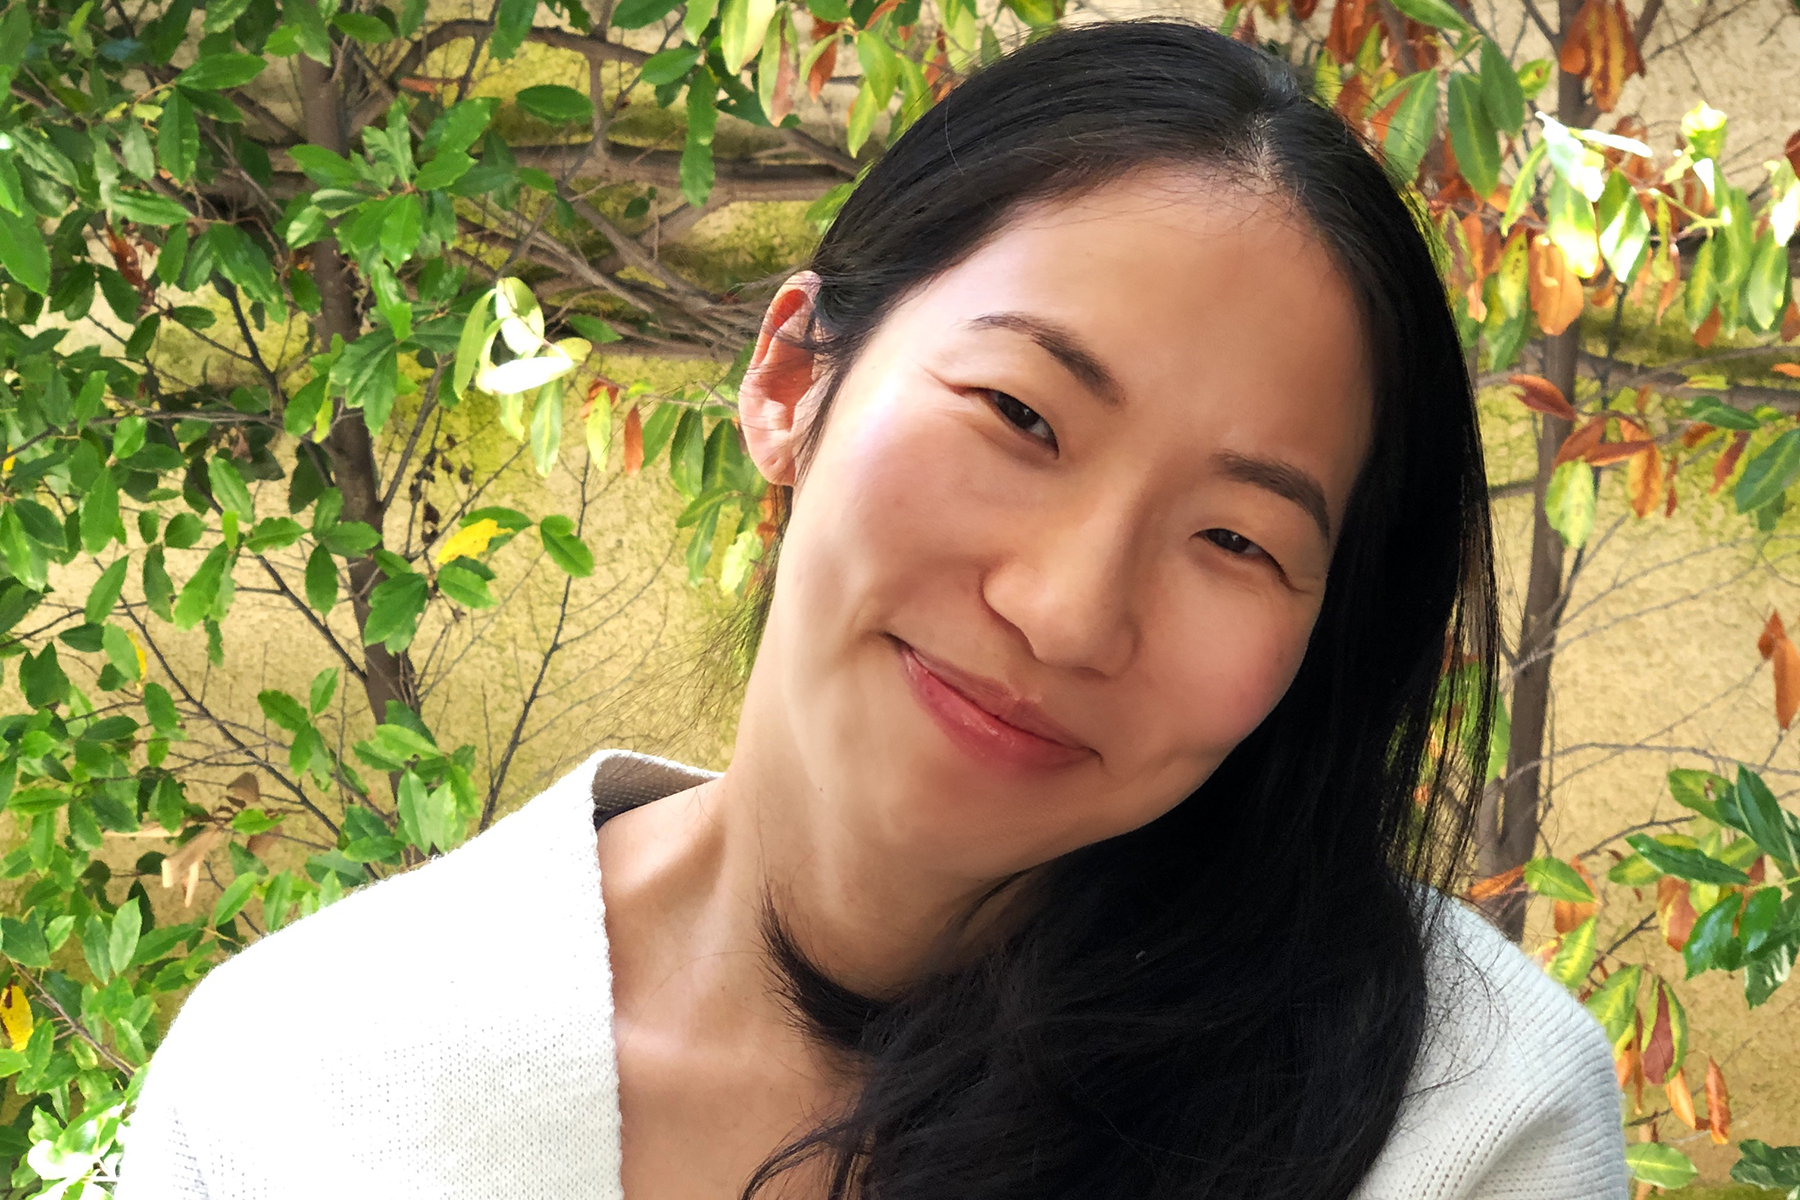 WSU’s Visiting Emerging Poet Cindy Juyoung Ok, pictured here, will read her work.